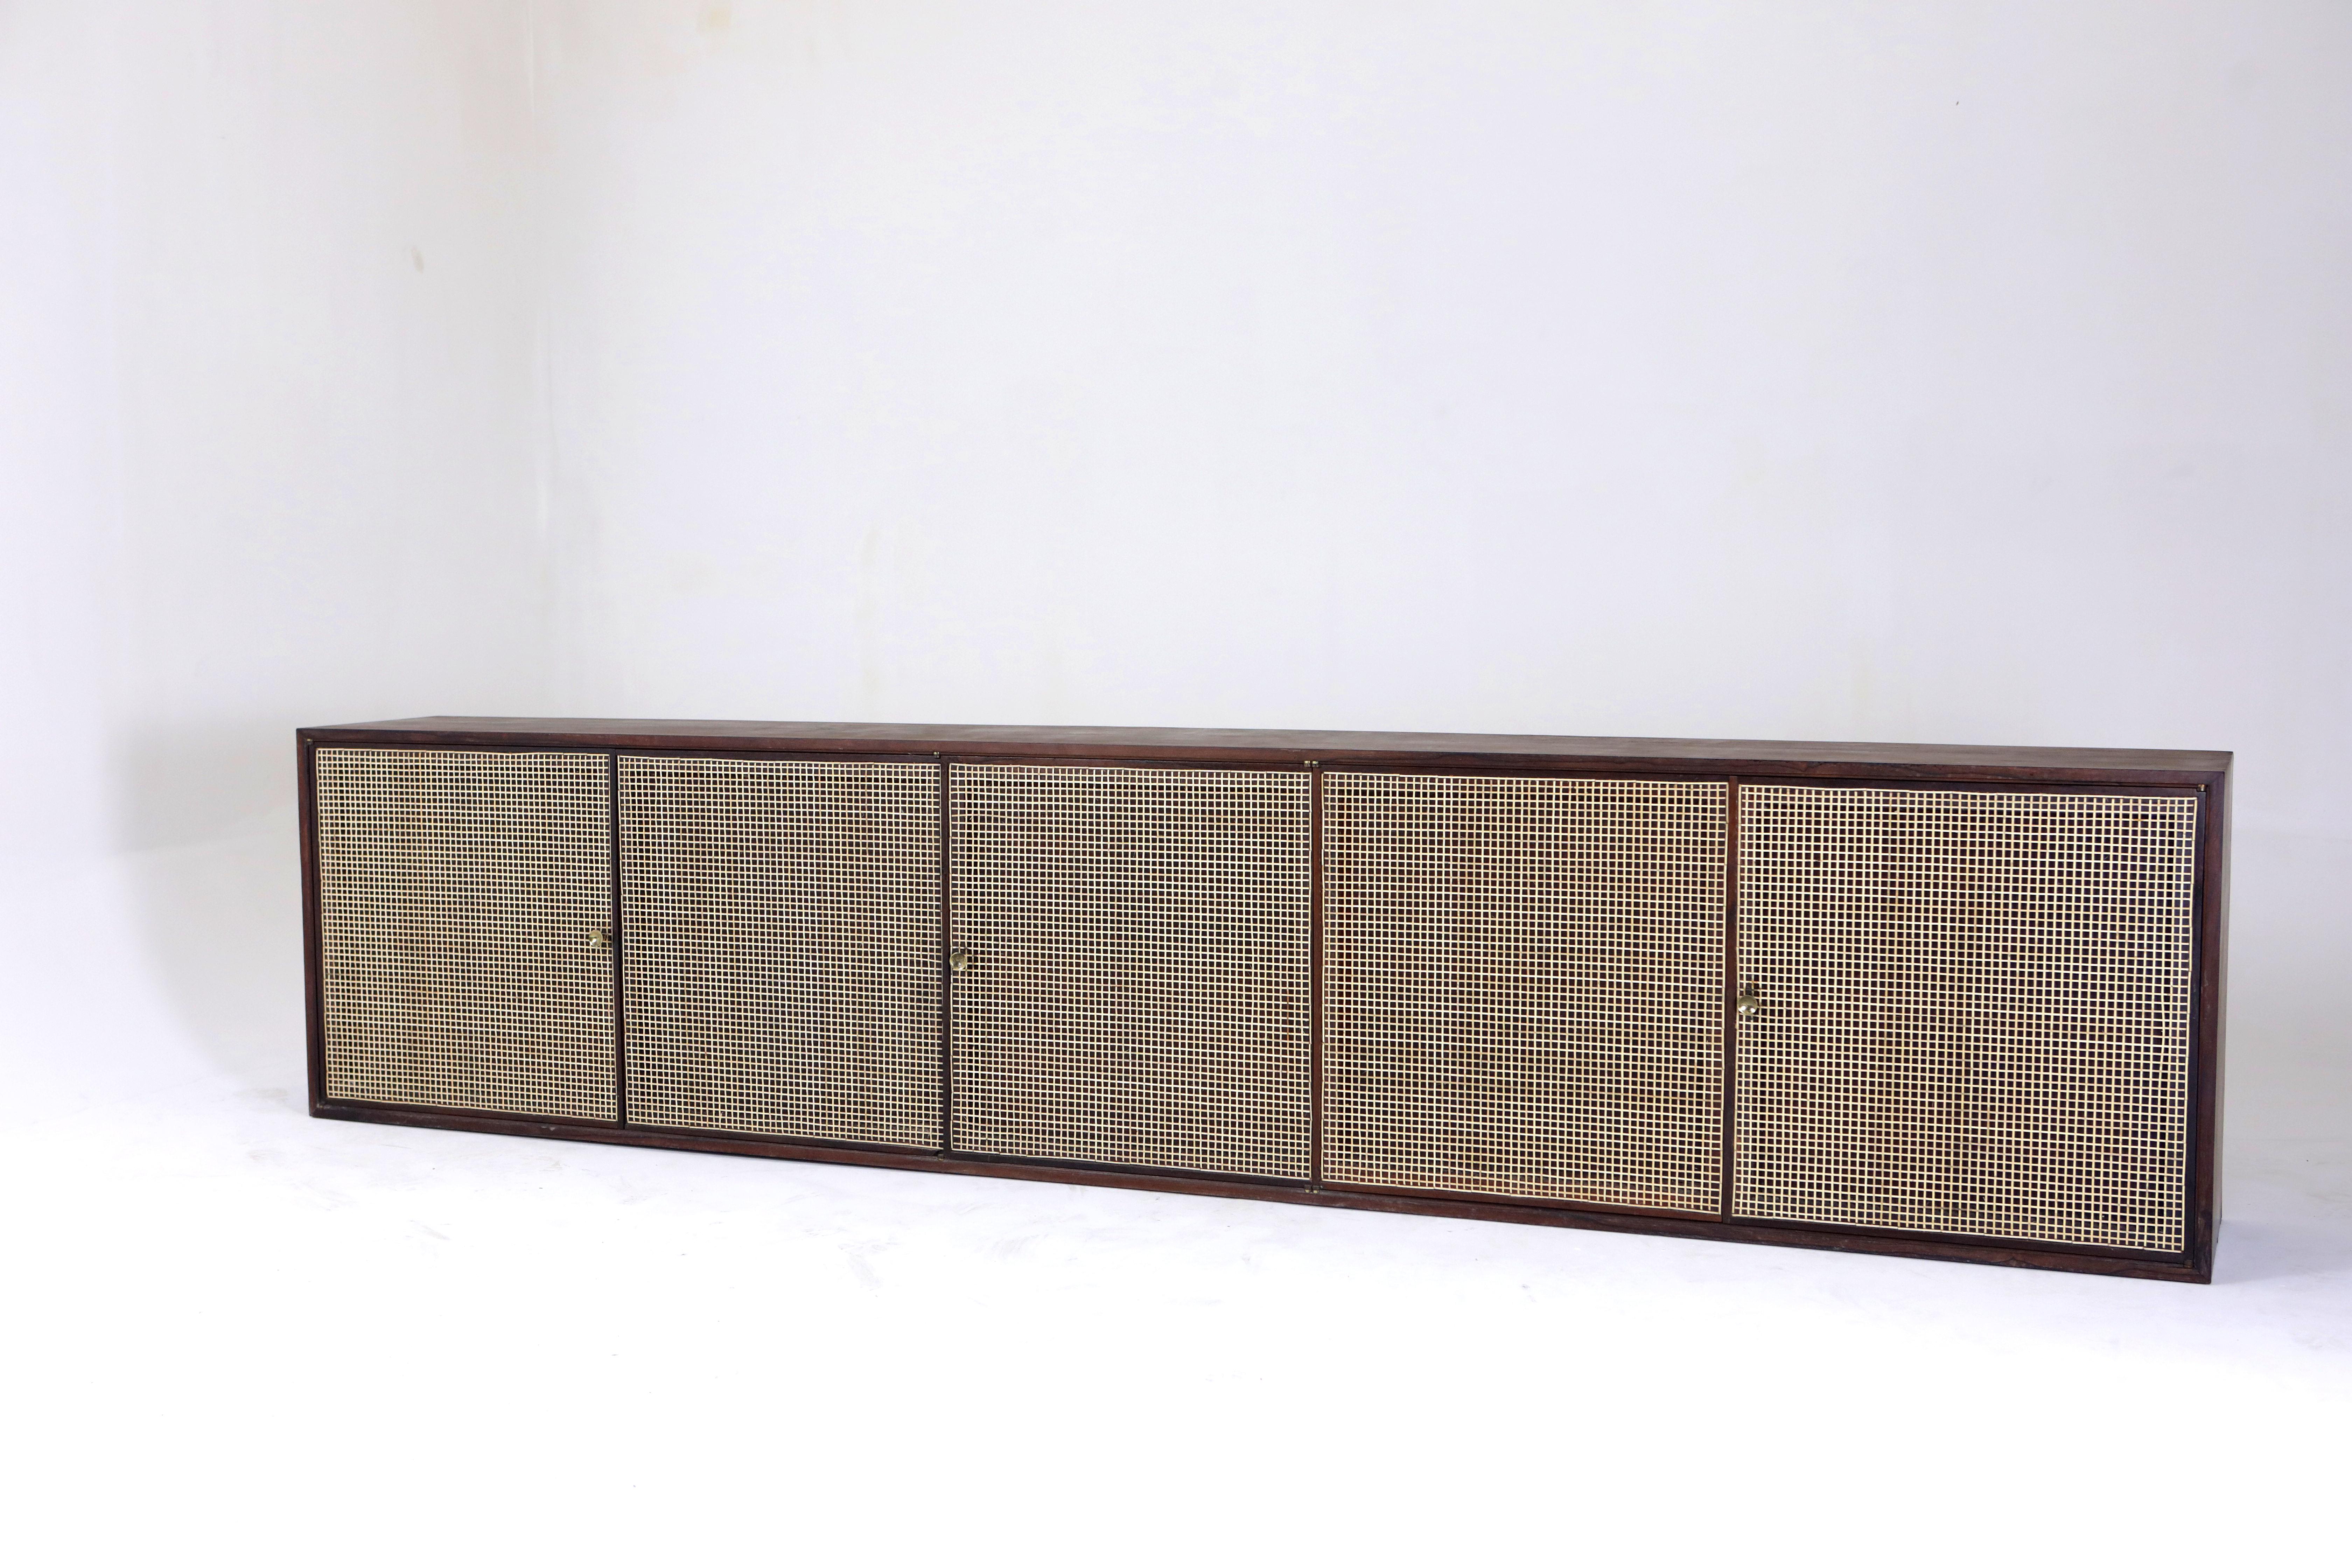 Mid-Century Modern Wall-Mounted Buffet by Forma Manufacture, Brazil, 1960s

This Wall-Mounted Buffet by Forma Manufacture is structured in wood and finished with a natural varnish, enhancing the wood's organic textures and tones. The standout